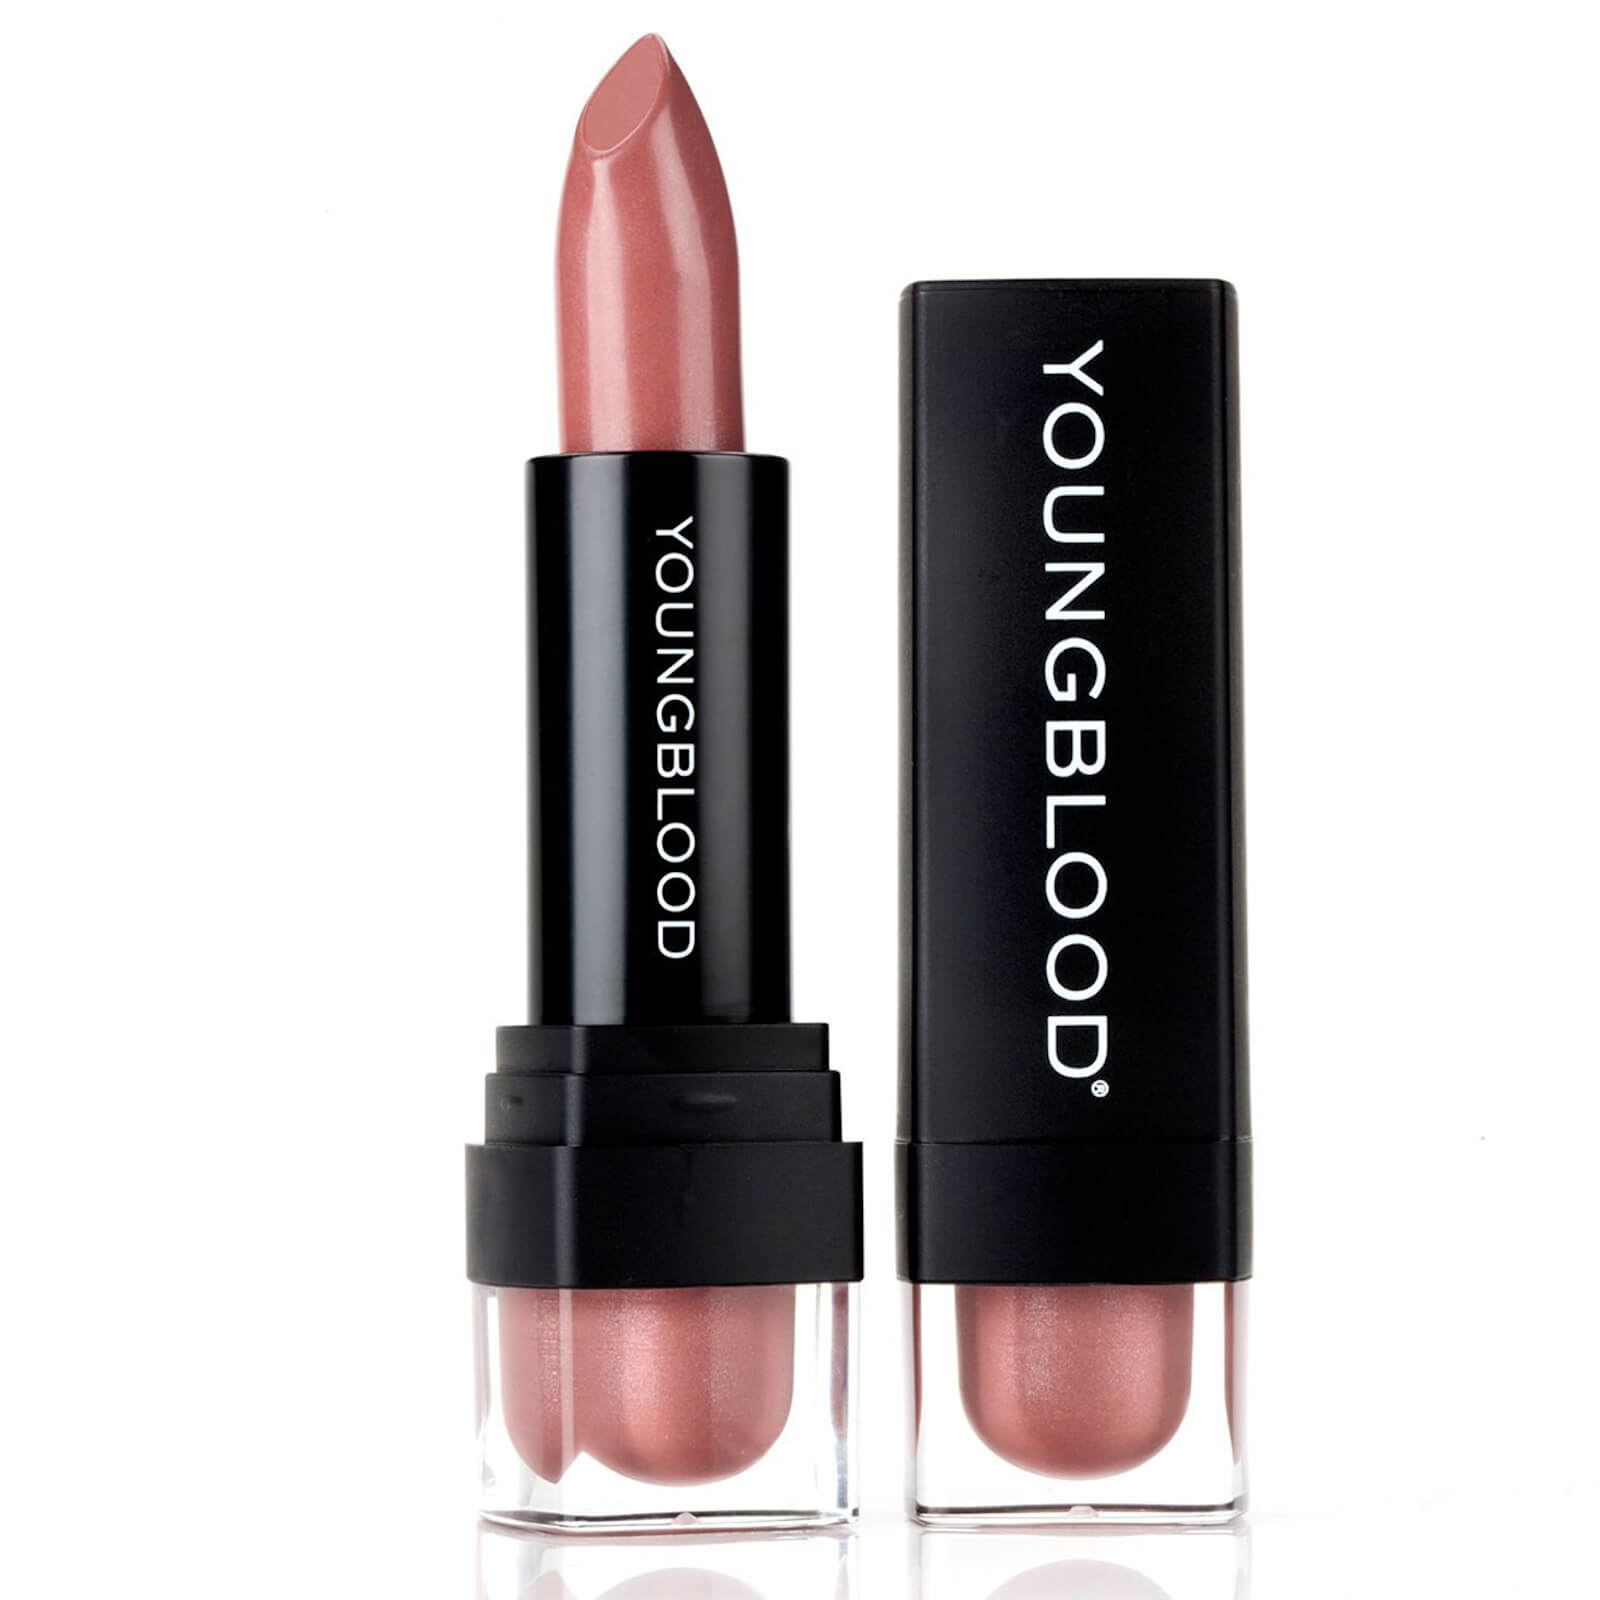 Youngblood Mineral Cosmetics Youngblood Mineral Crème Lipstick 4g (Various Shades) - Blushing Nude